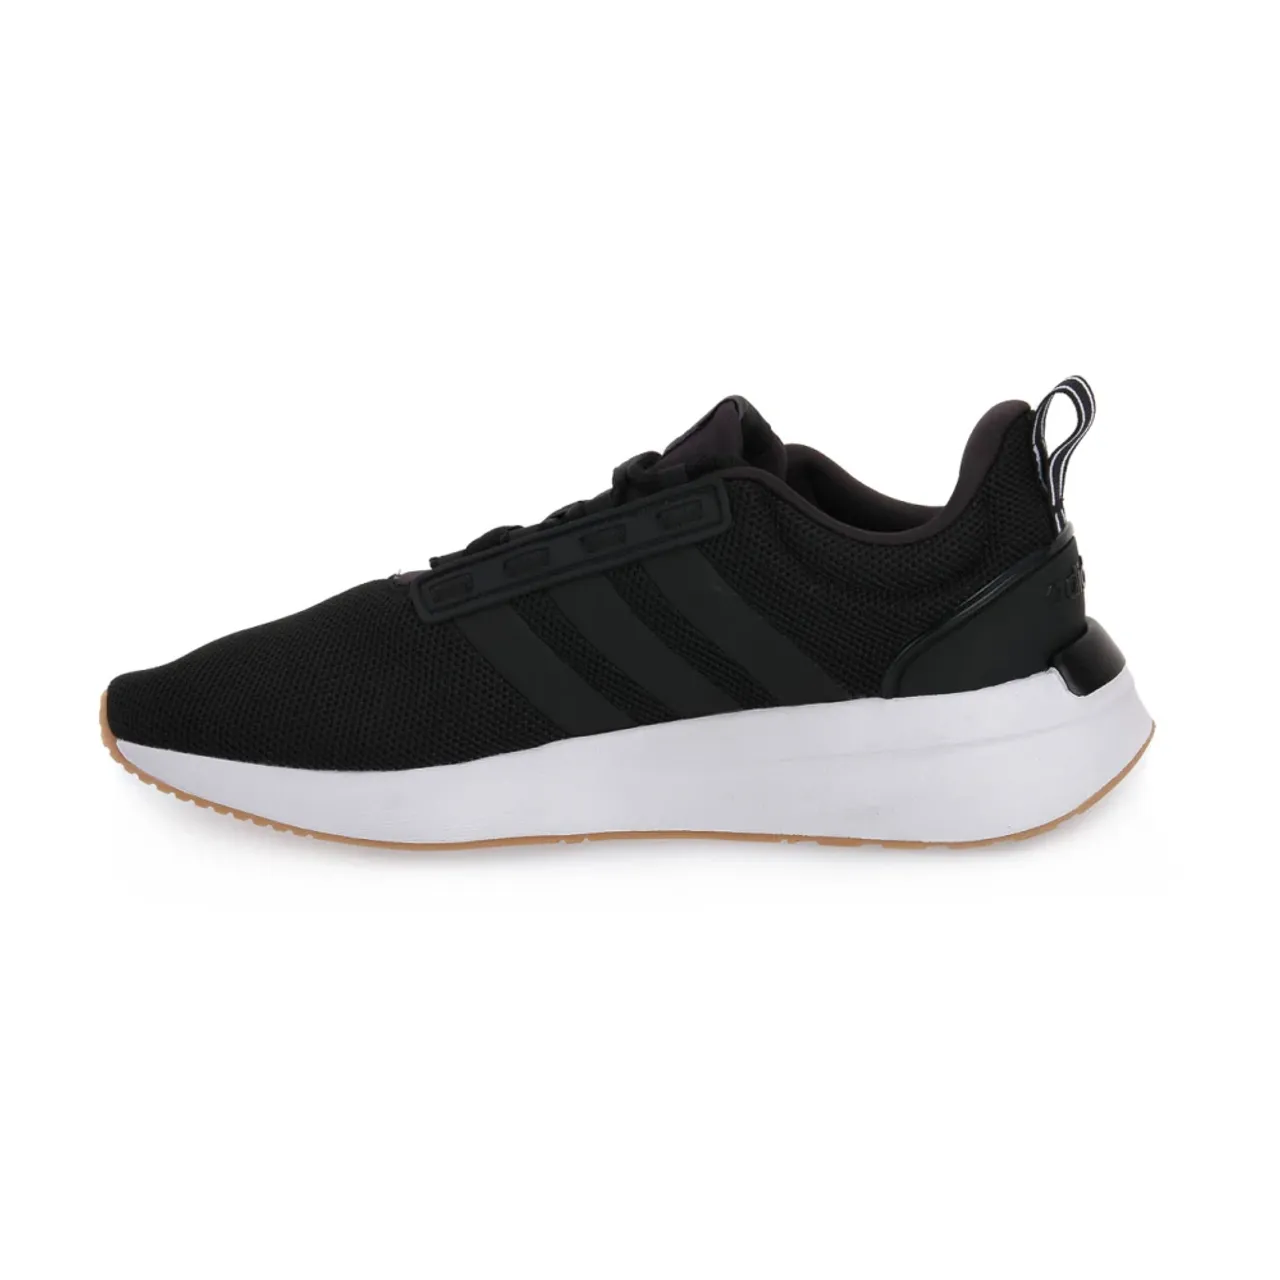 Adidas , Racer Tr21 Sneakers for Men ,Black male, Sizes: